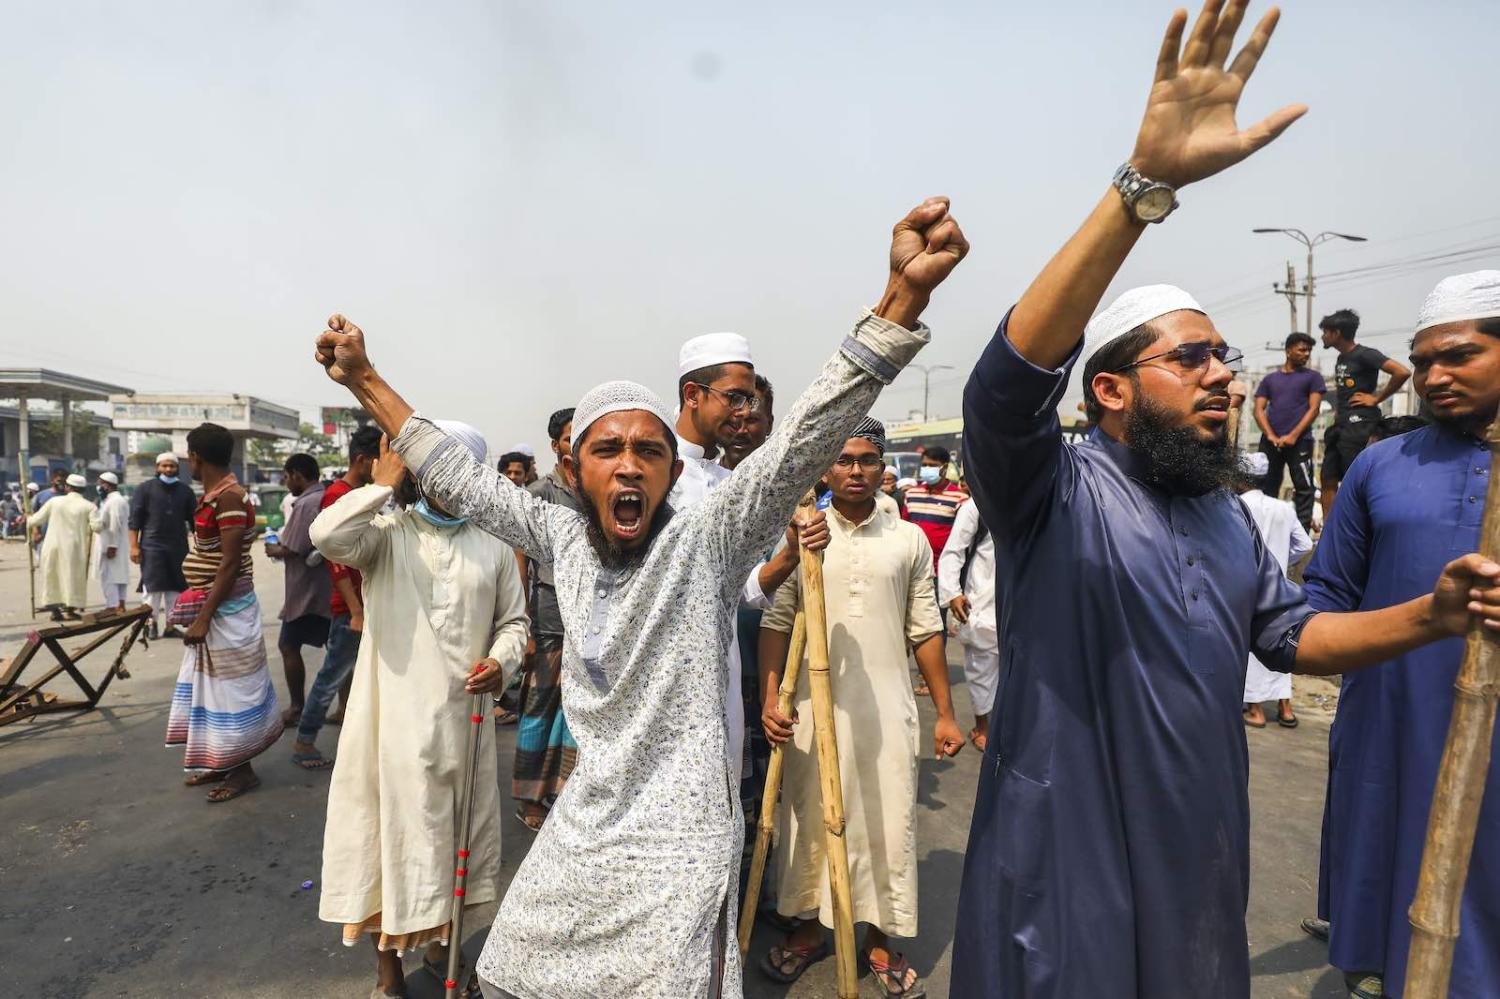 Activists from Hefazat-e-Islam block a road following deadly clashes with police over Indian Prime Minister Narendra Modi’s visit, 28 March 2021 in Narayanganj, Bangladesh (Ahmed Salahuddin/NurPhoto via Getty Images)